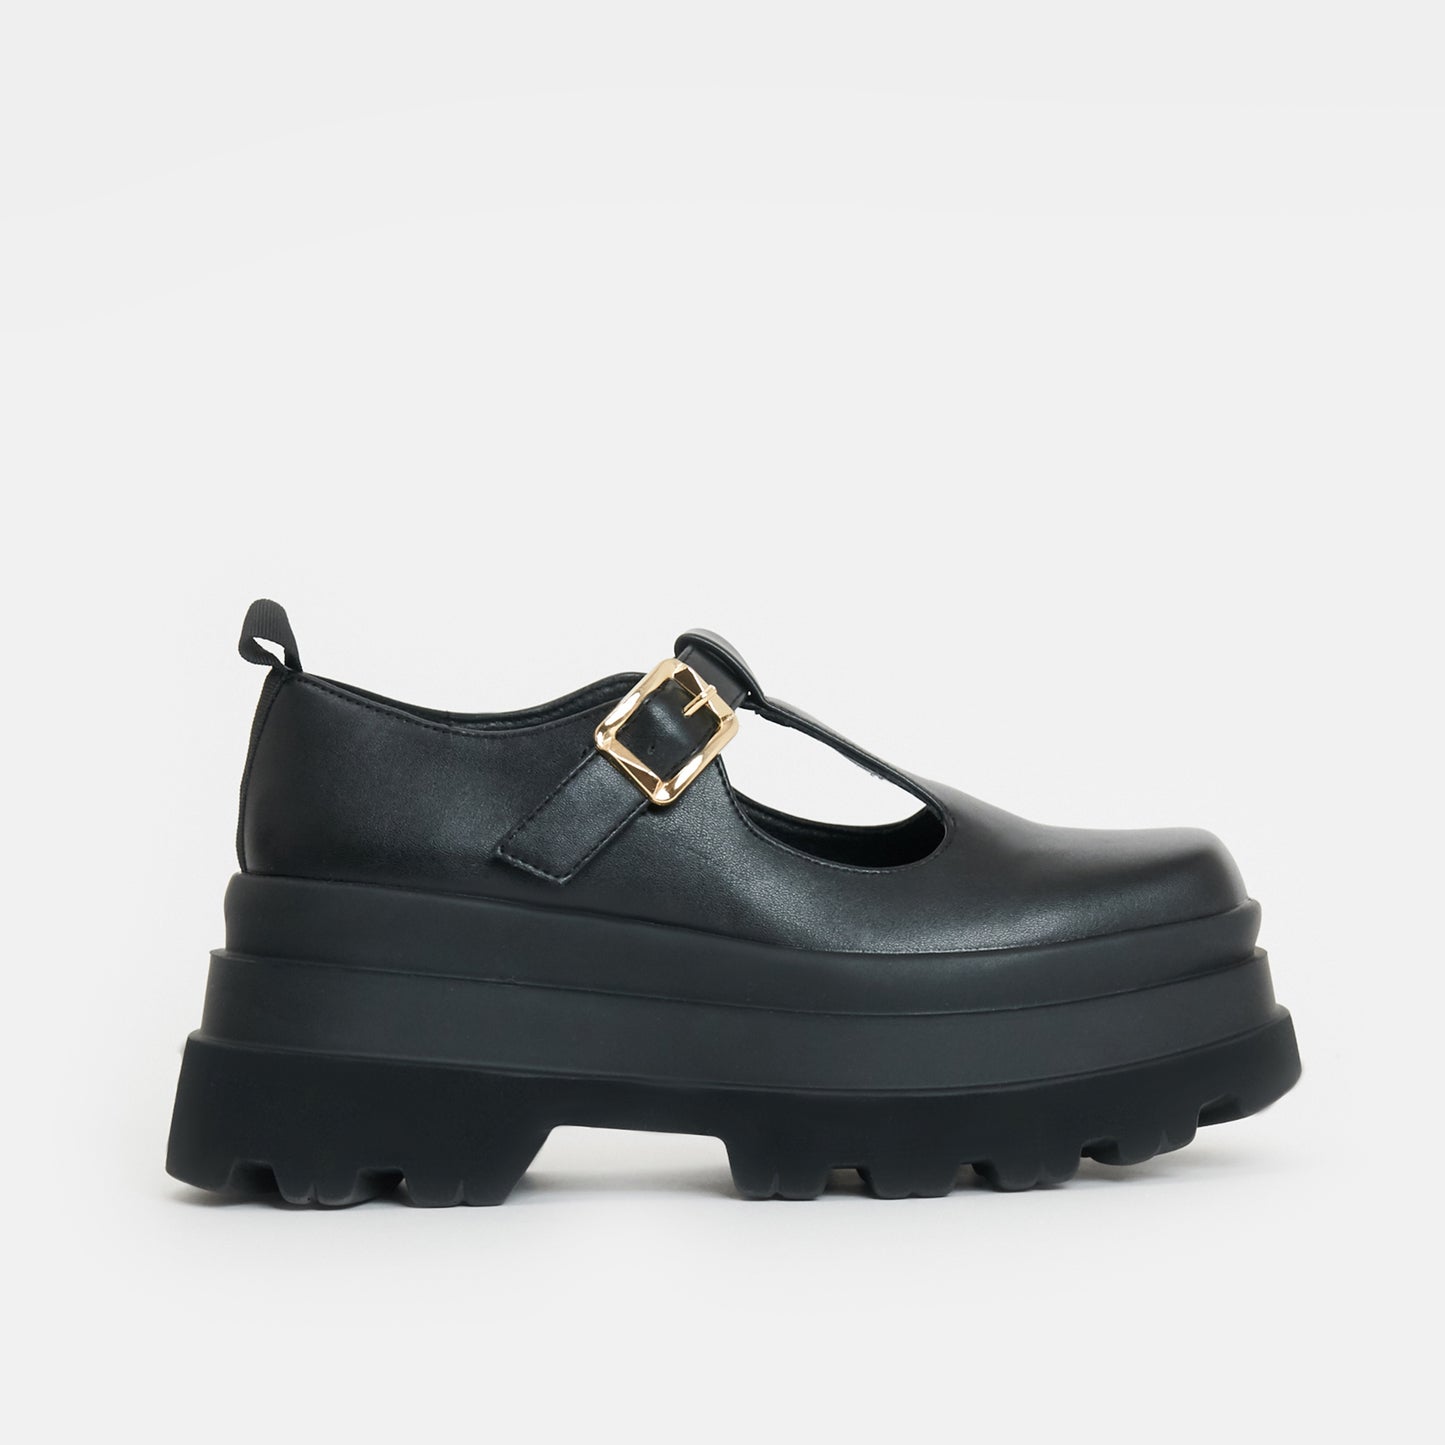 Silent Amity Trident Platform Mary Jane Shoes - Mary Janes - KOI Footwear - Black - Side View